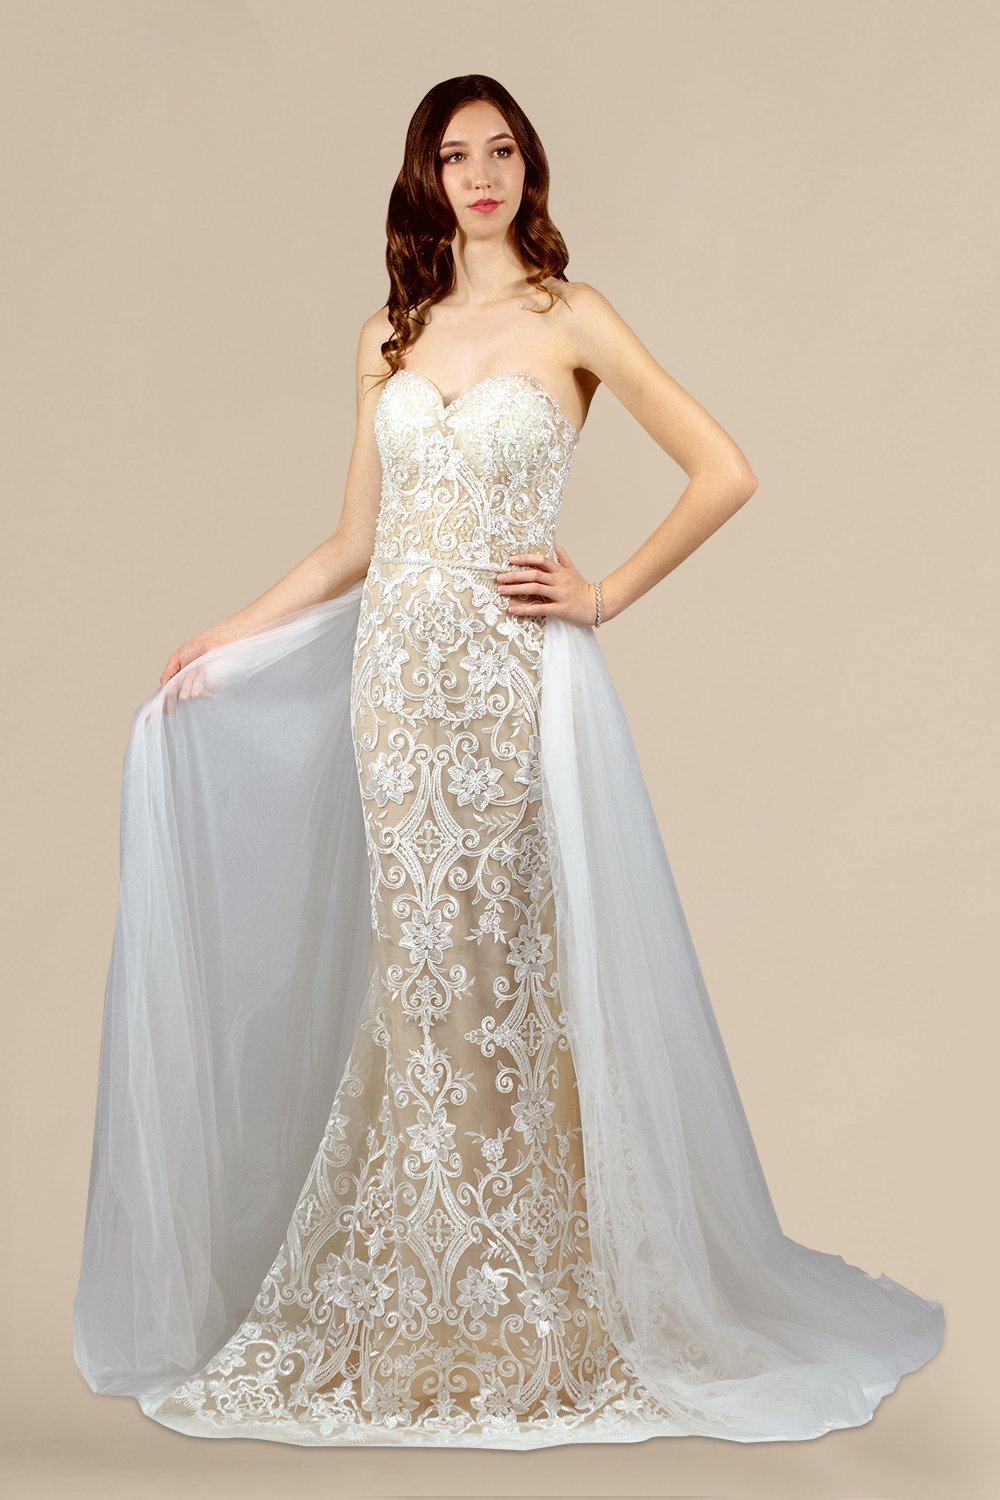 KRISTALINA | Ivory/Nude Lace Wedding Gown With Detachable Skirt